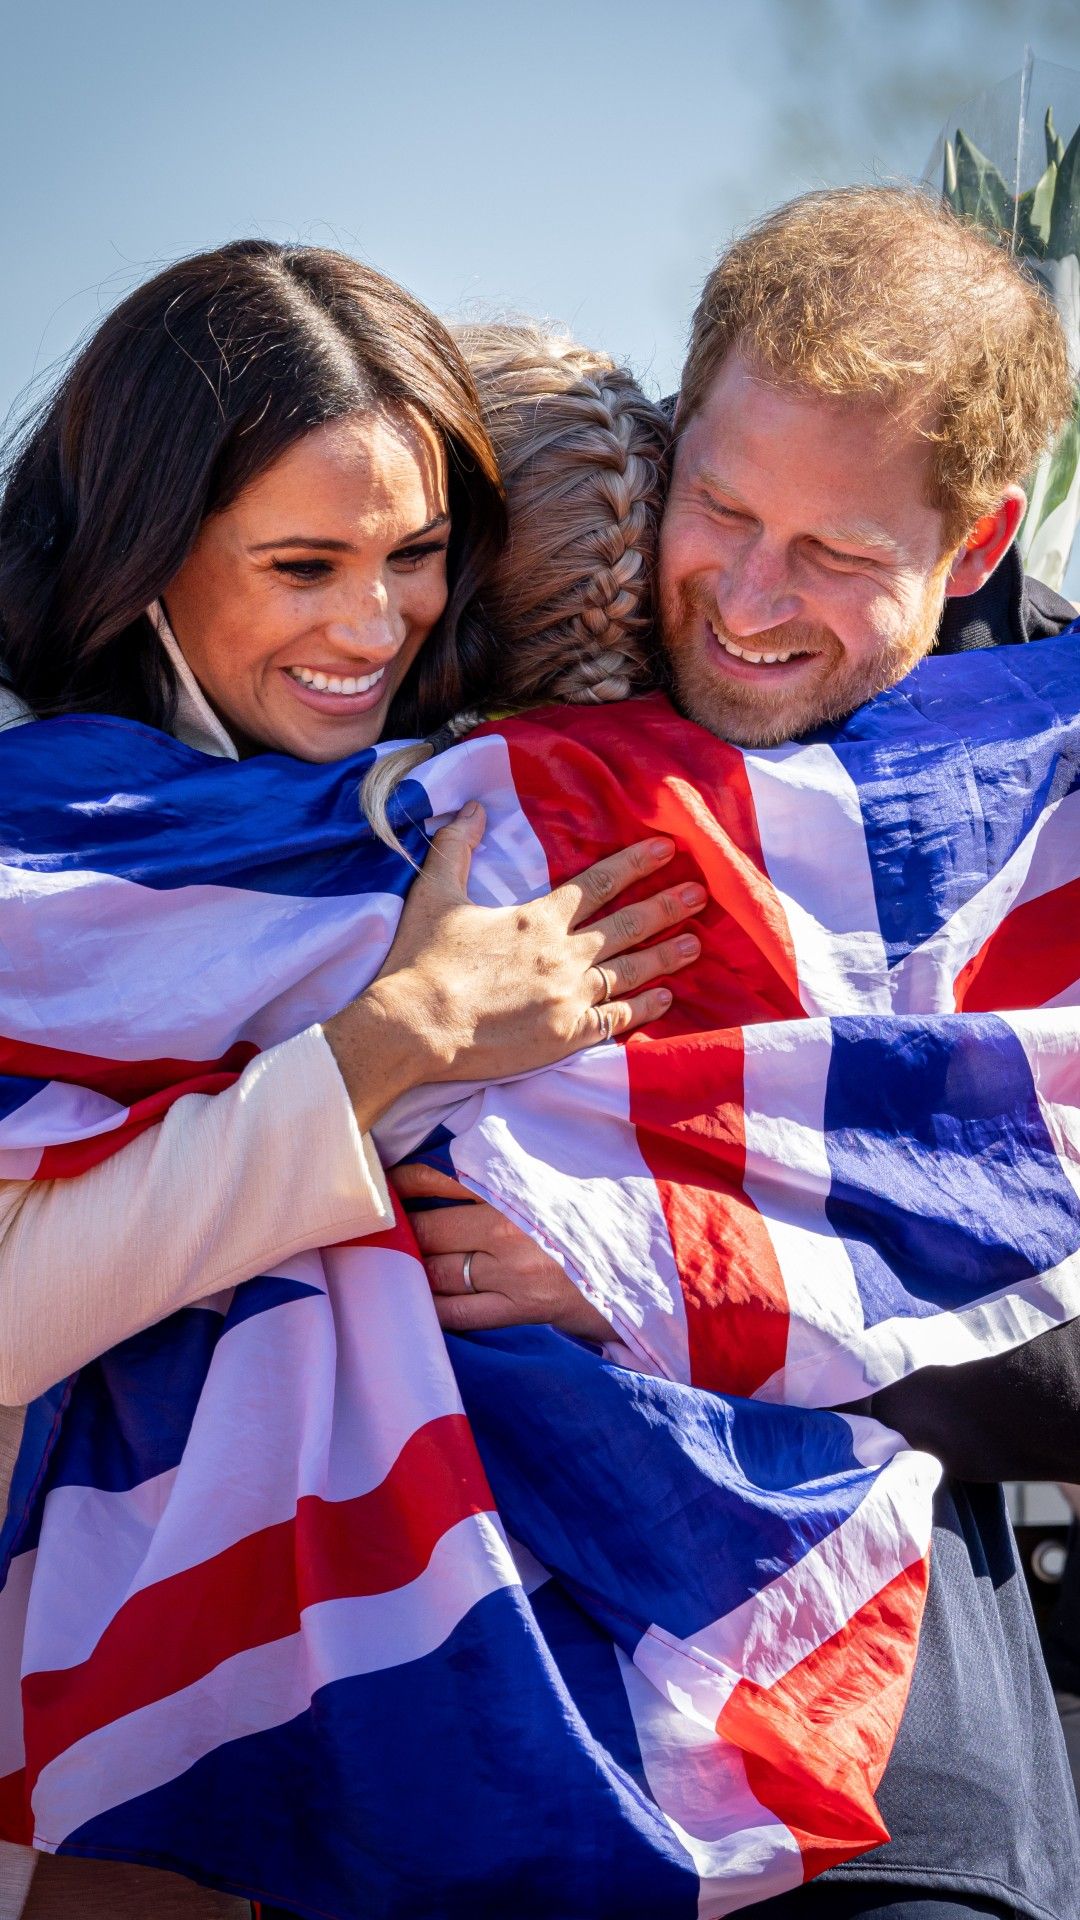 <p>                     On January 8, 2020, Prince Harry and Meghan Markle announced their decision to “step back” from their roles as senior royals. They revealed their initial intentions to split their time between the US and the UK in a move that was somewhat controversially dubbed "Megxit."                   </p>